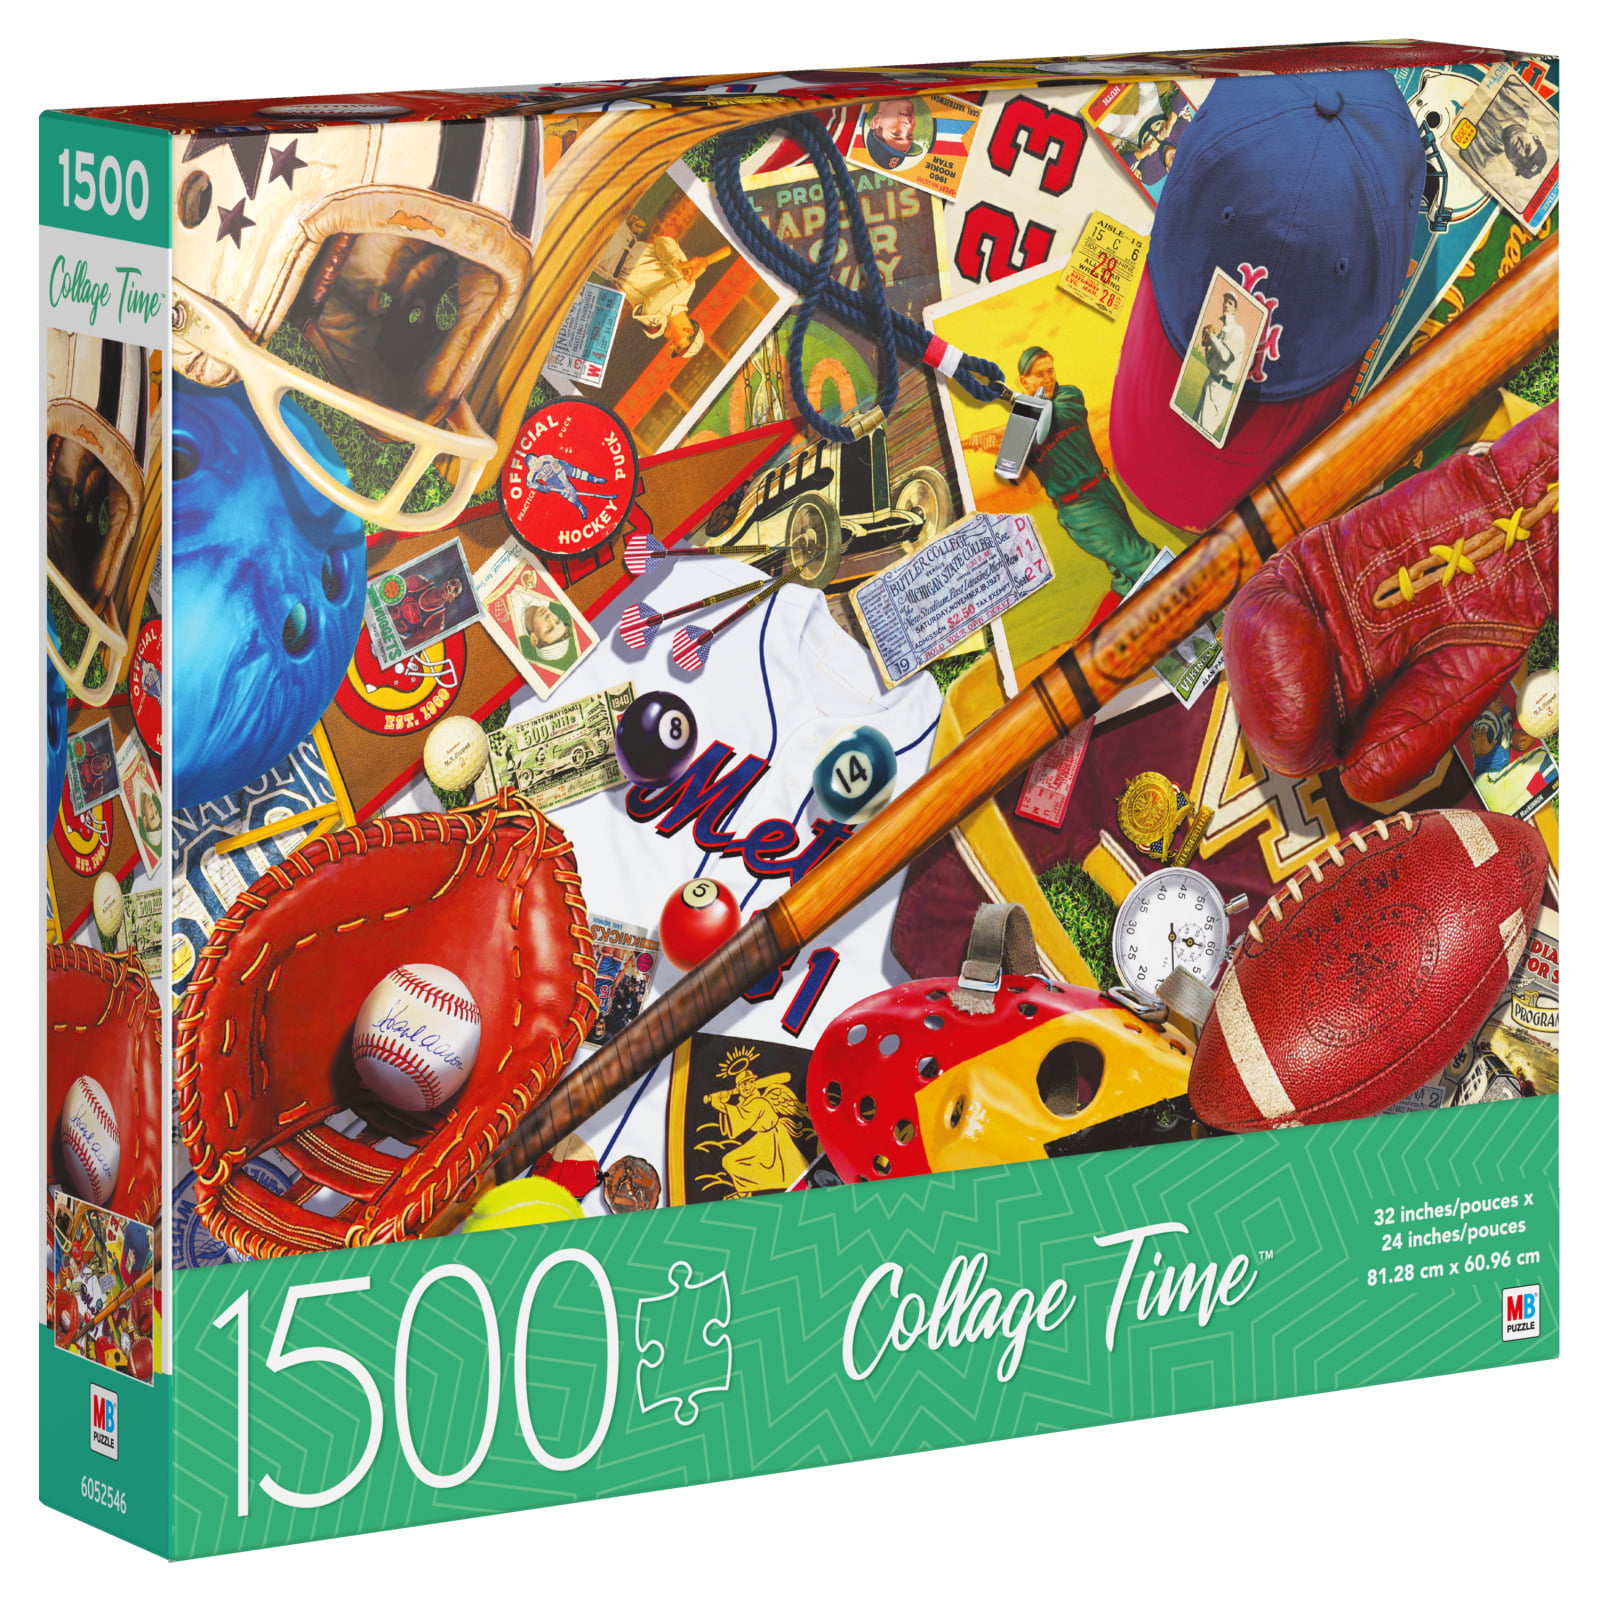 1500 Piece Puzzle Collage Time Jigsaw Puzzle Vintage Sports Lover 